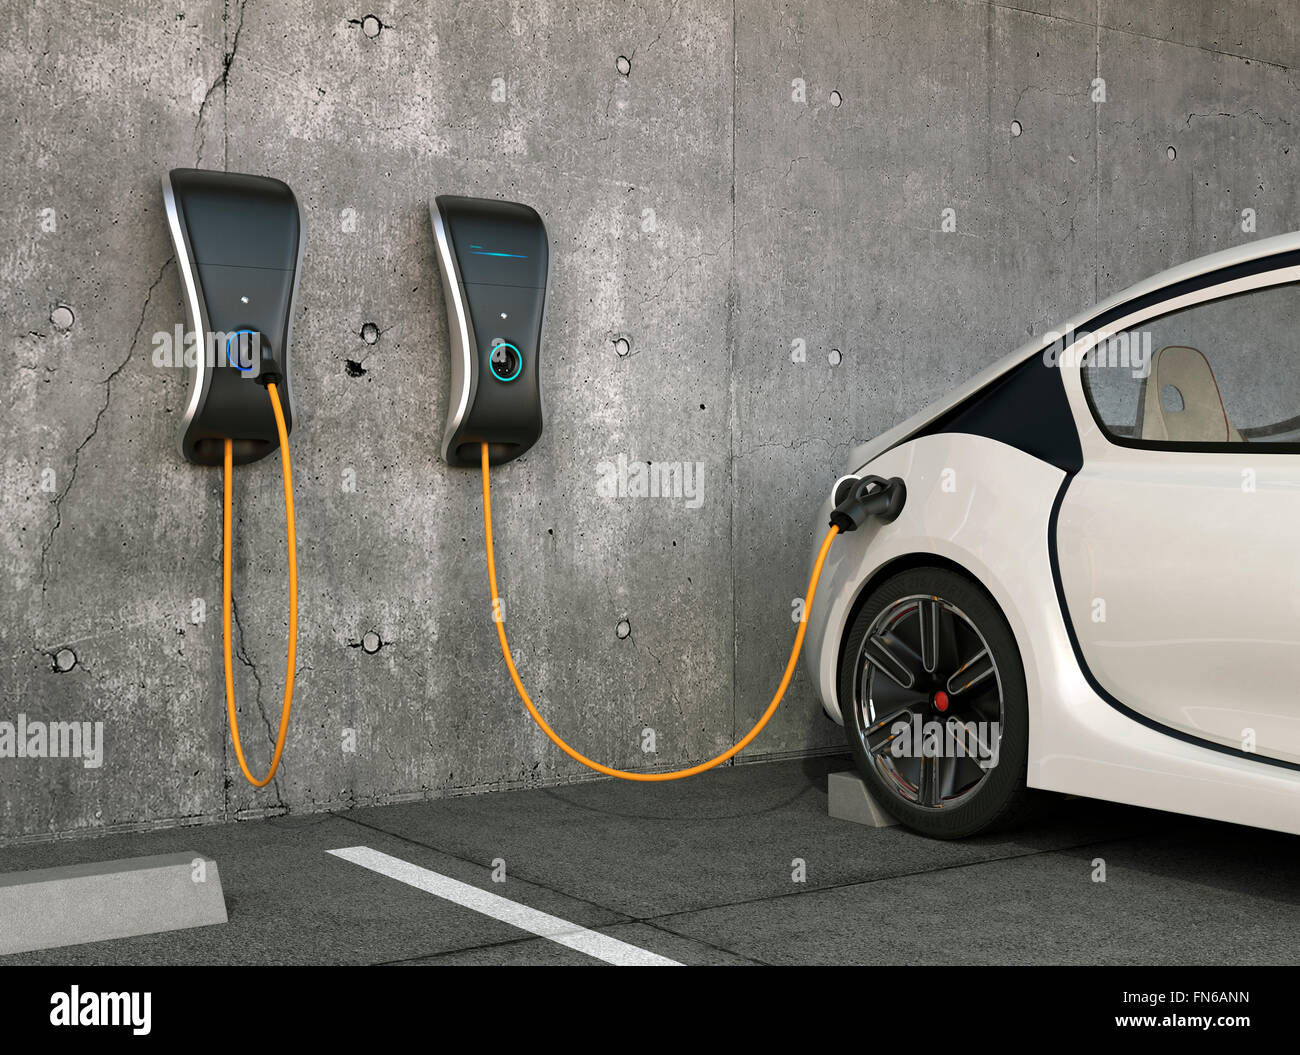 Electric vehicle charging station for home. Stock Photo